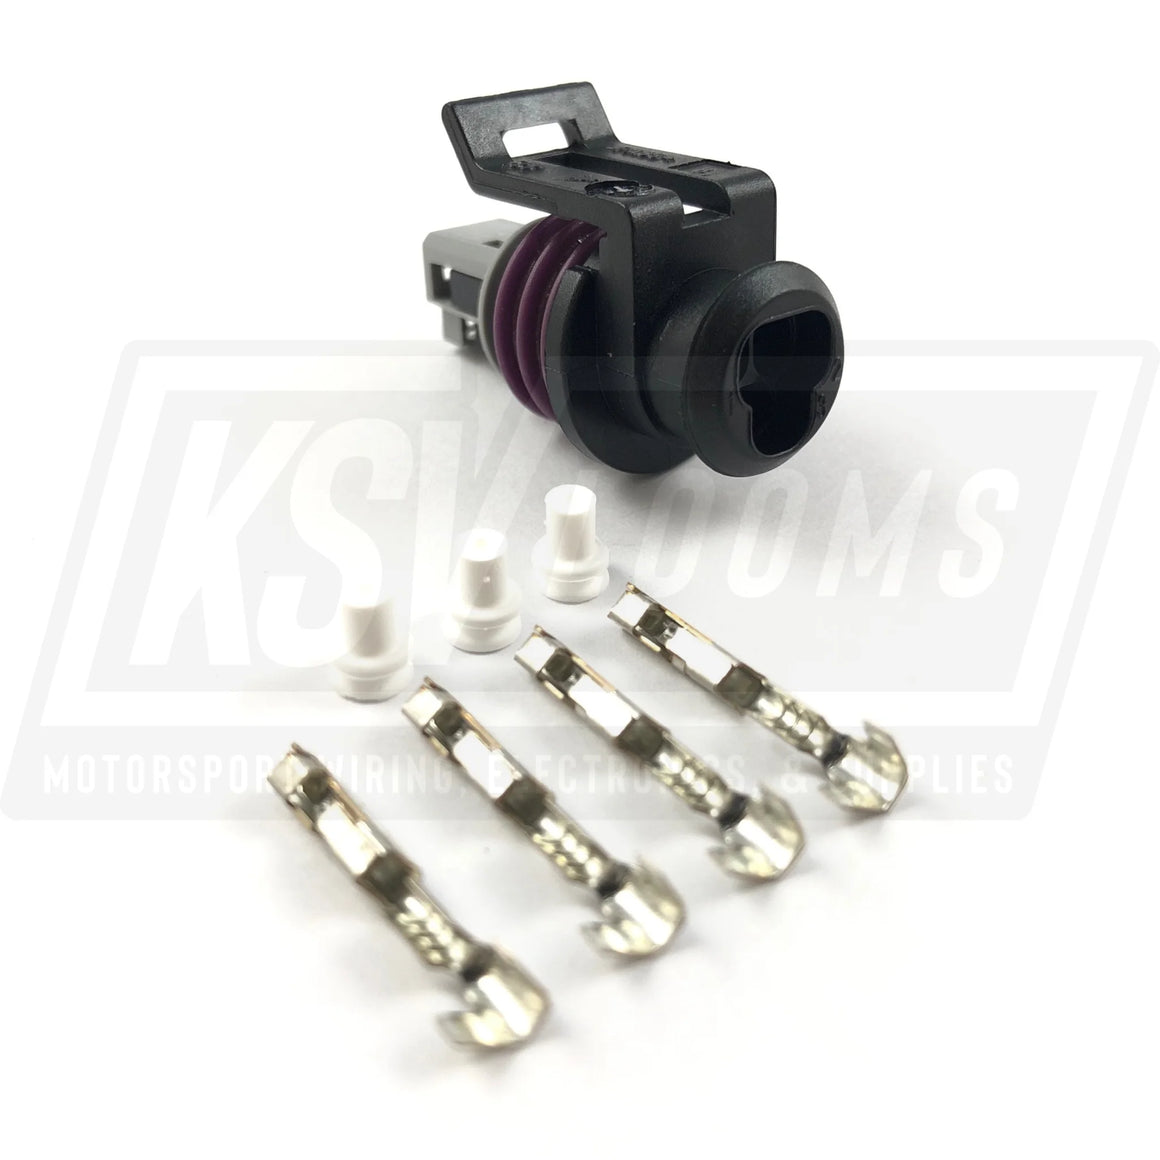 3-Way Connector Kit Fits Fueltech Ps-150 Pressure Sensor 5005100020-Blk (22-20 Awg)